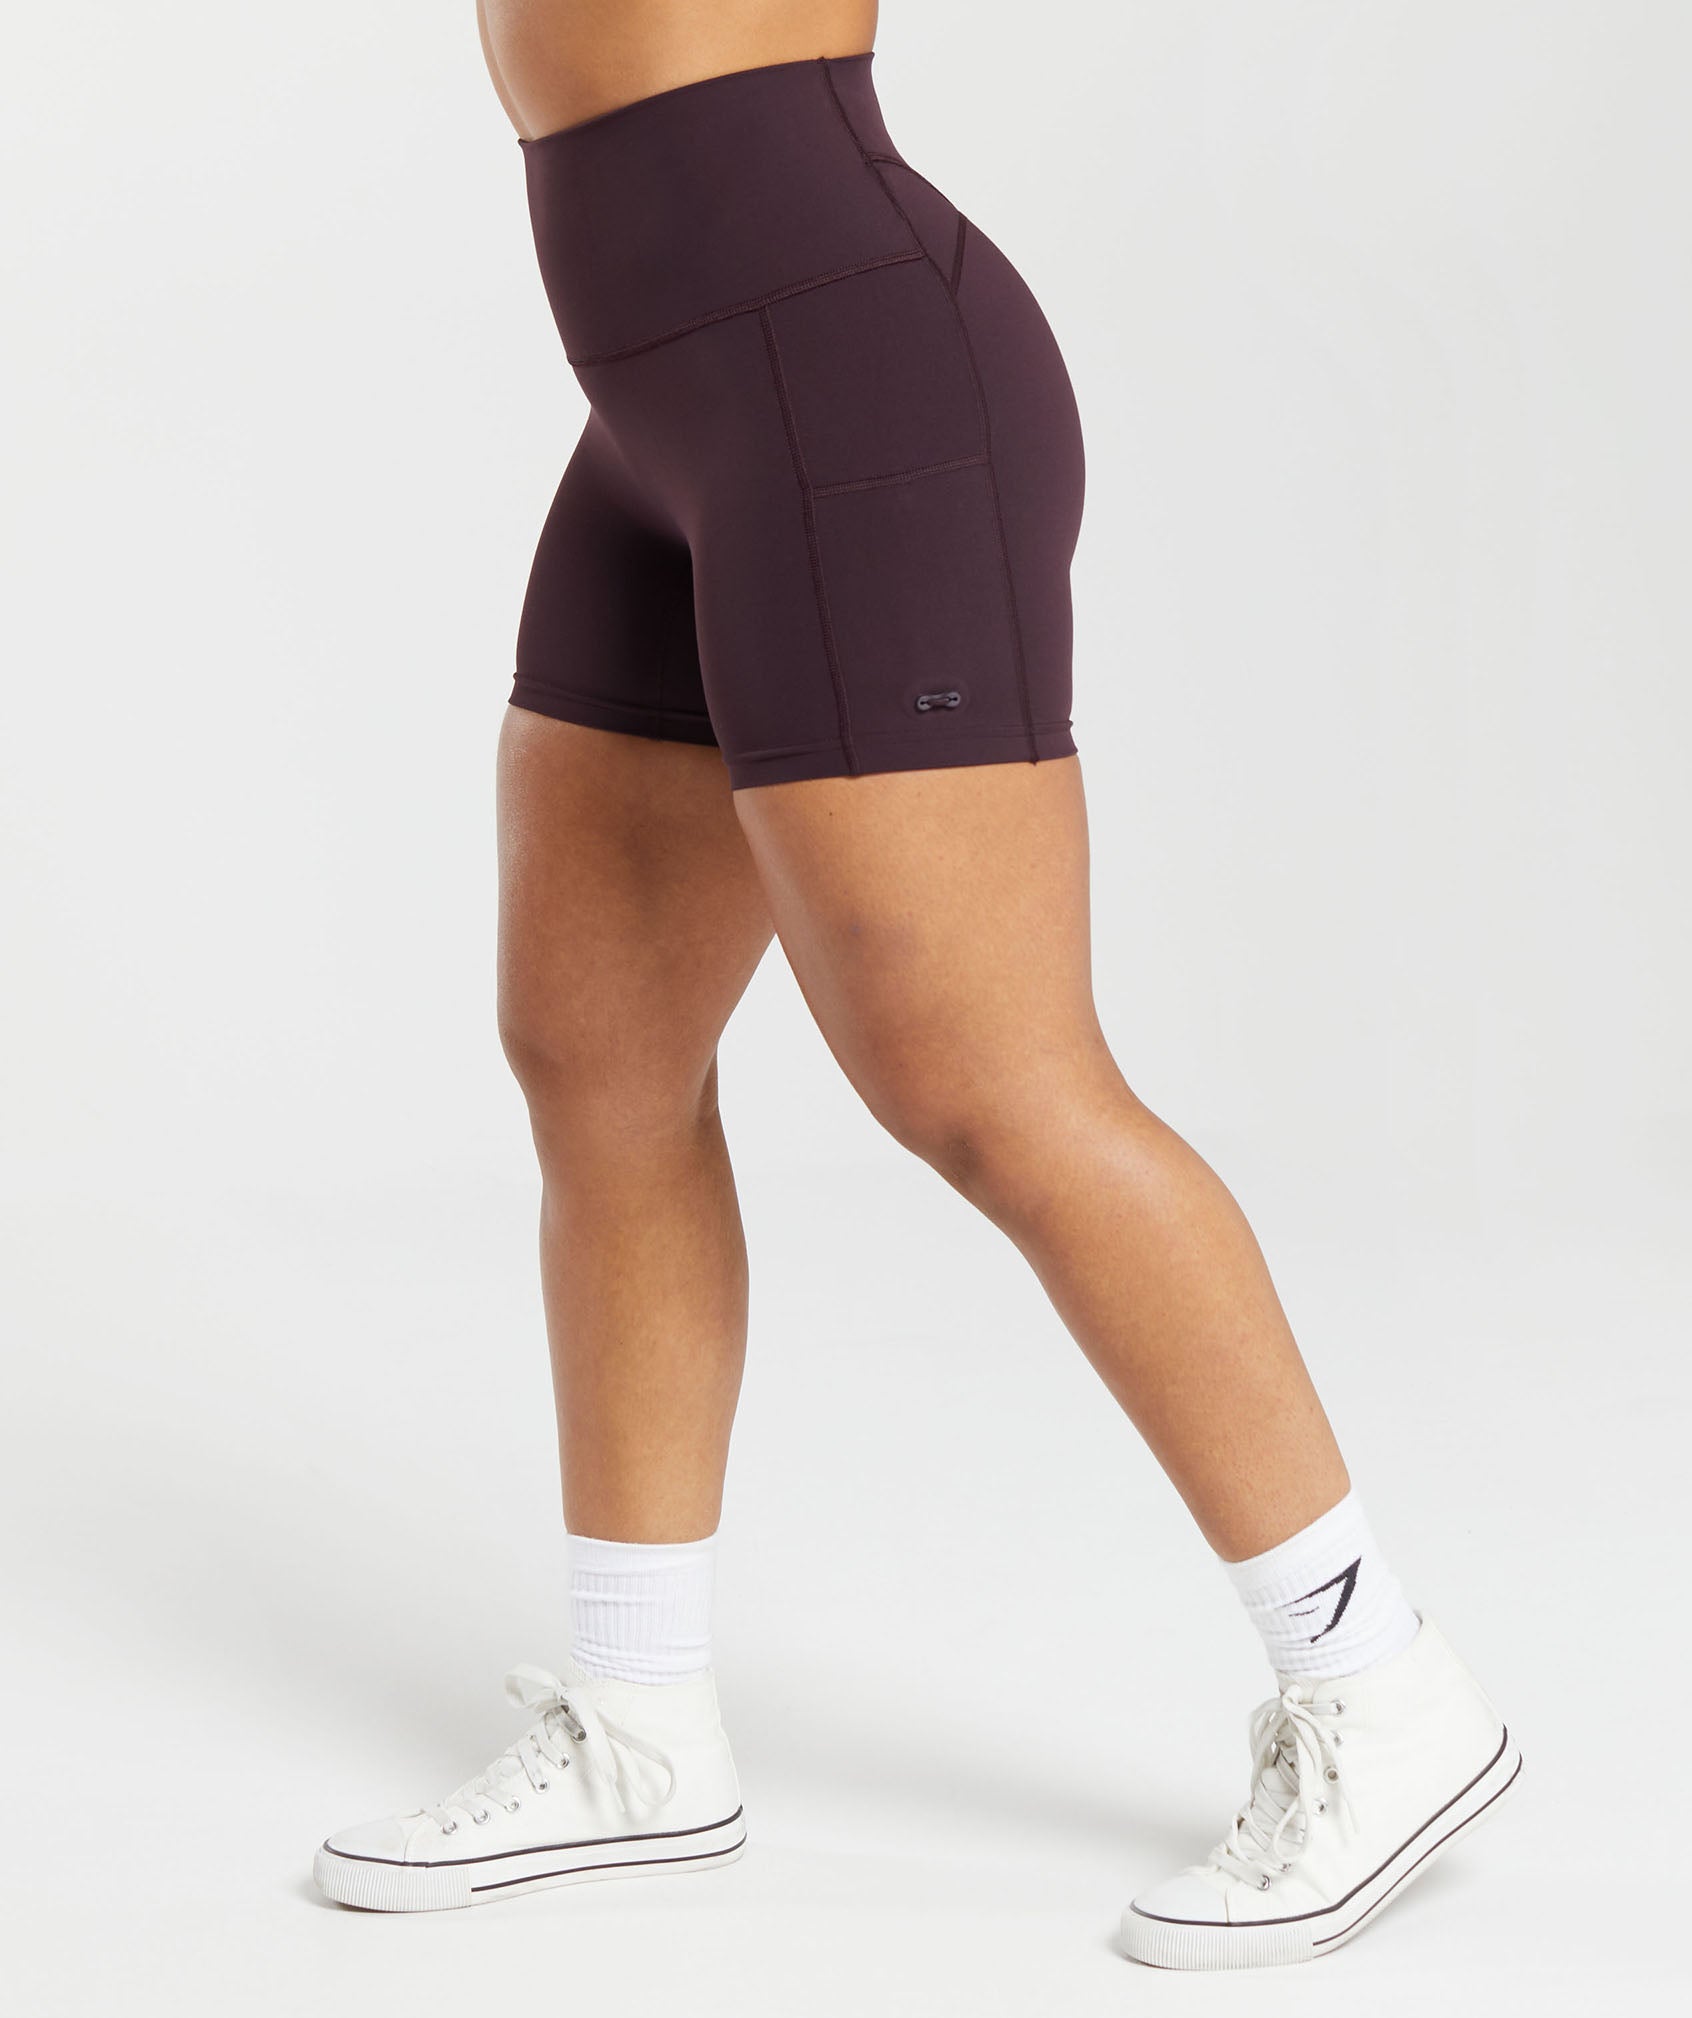 Legacy Tight Shorts in Plum Brown - view 3